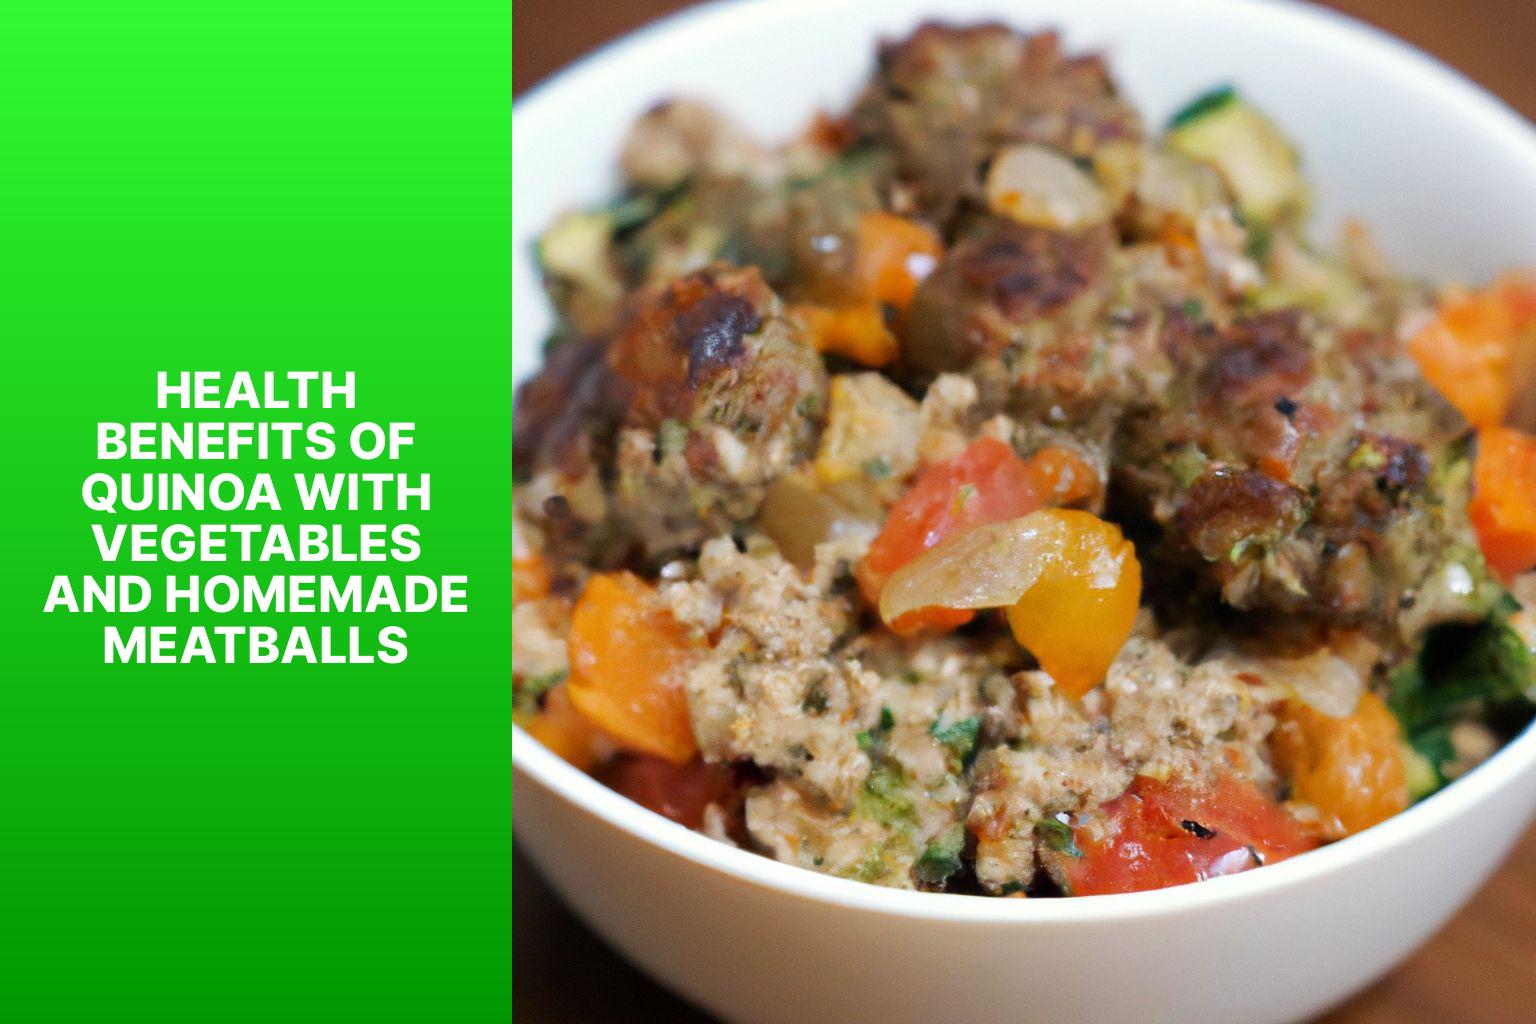 Health Benefits of Quinoa with Vegetables and Homemade Meatballs - Quinoa with Vegetables and Homemade Meatballs 